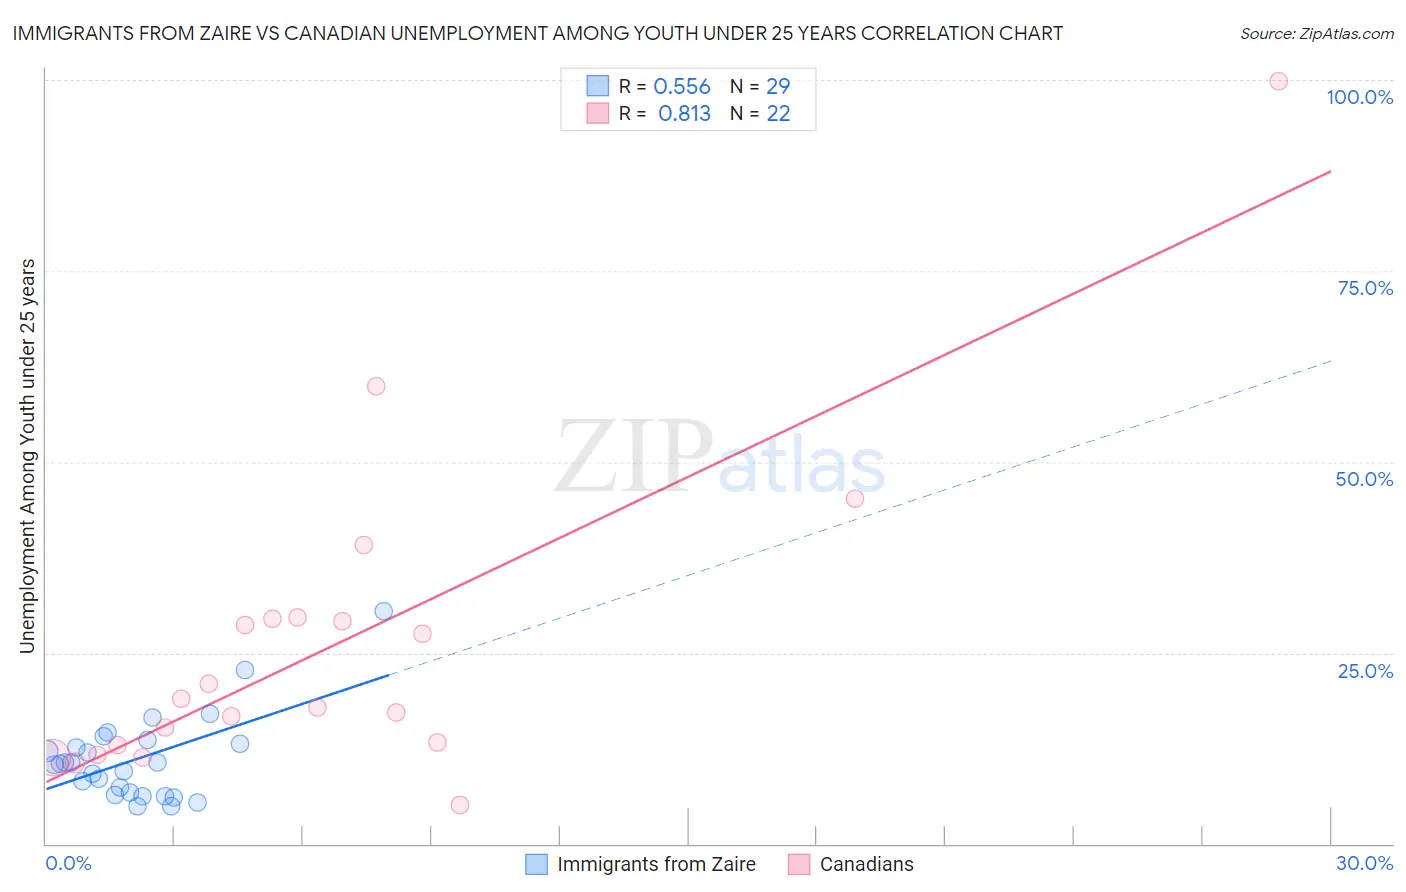 Immigrants from Zaire vs Canadian Unemployment Among Youth under 25 years